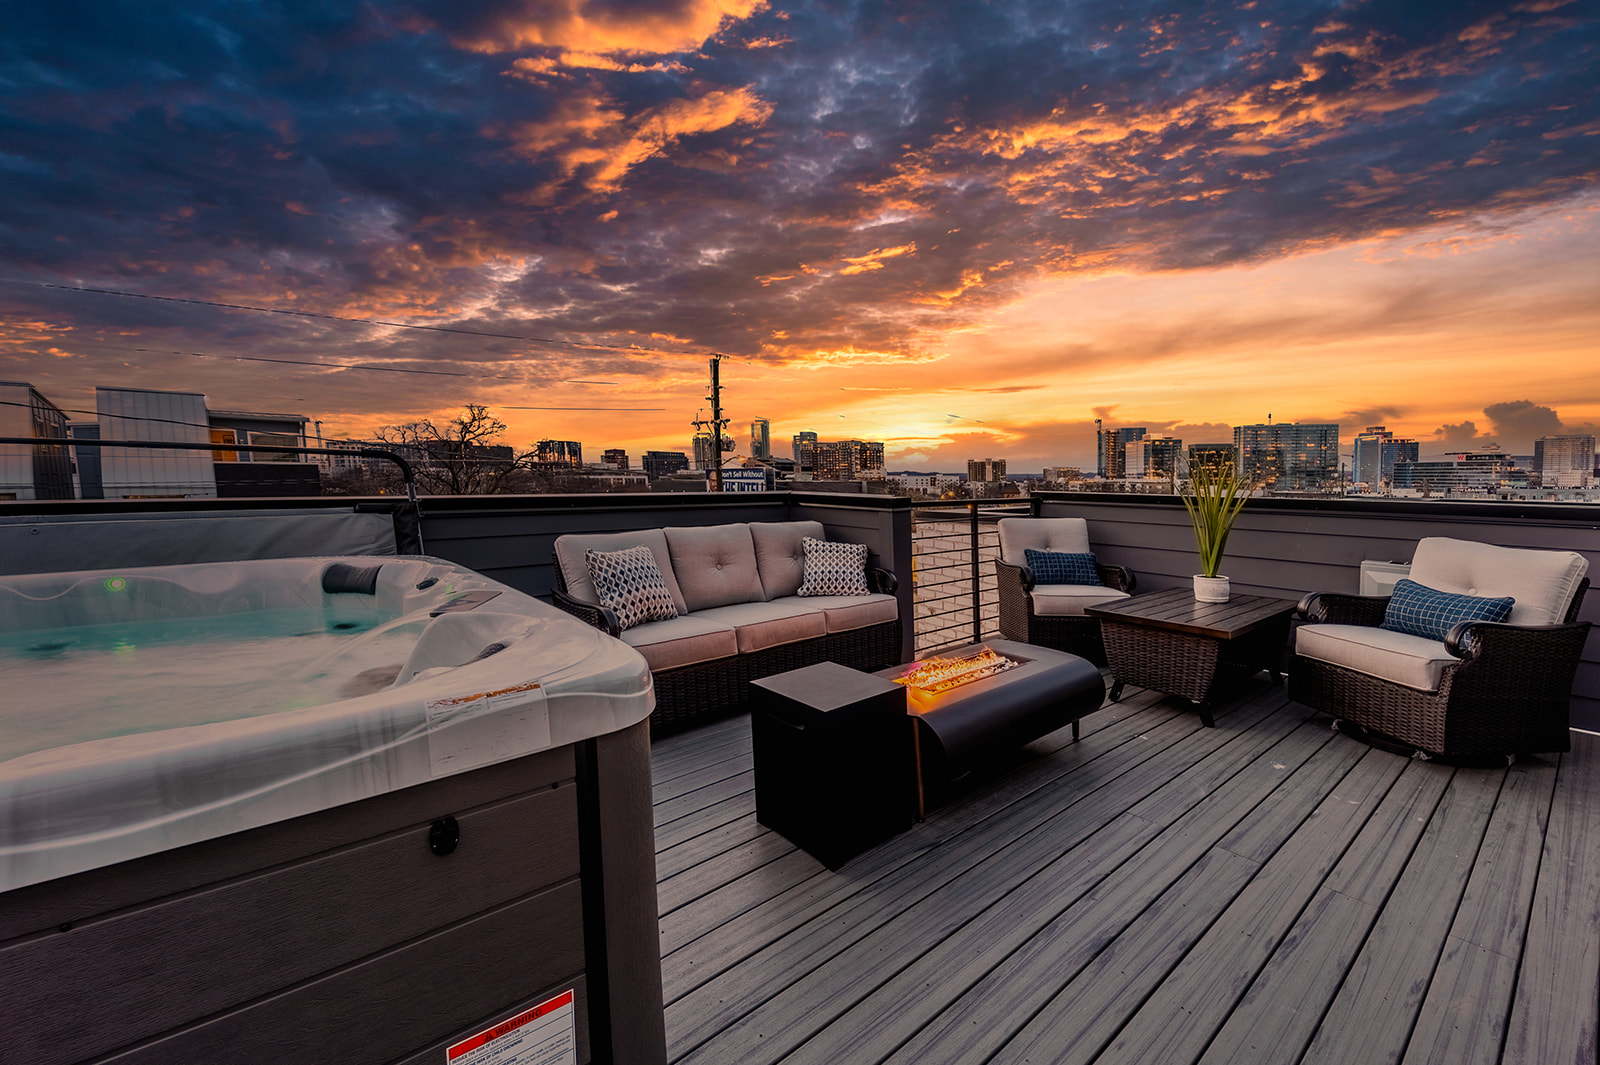 1st unit rooftop patio: Features hot tub, fire pit, outdoor bbq, and lounge area.